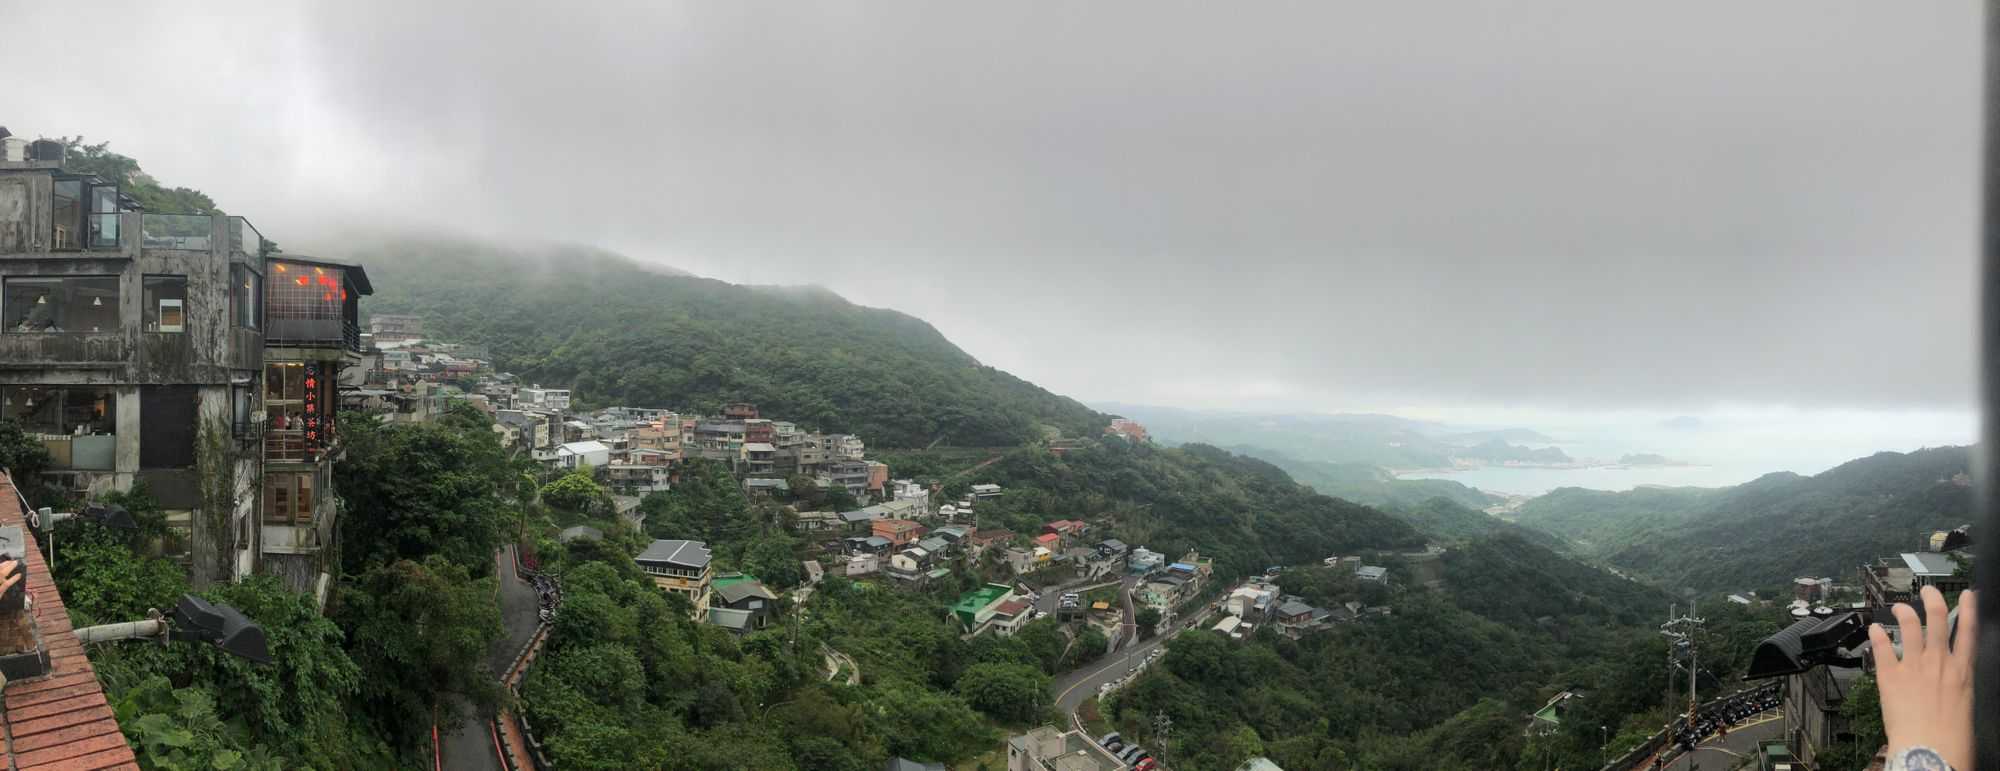 Jiufen (Image by author)